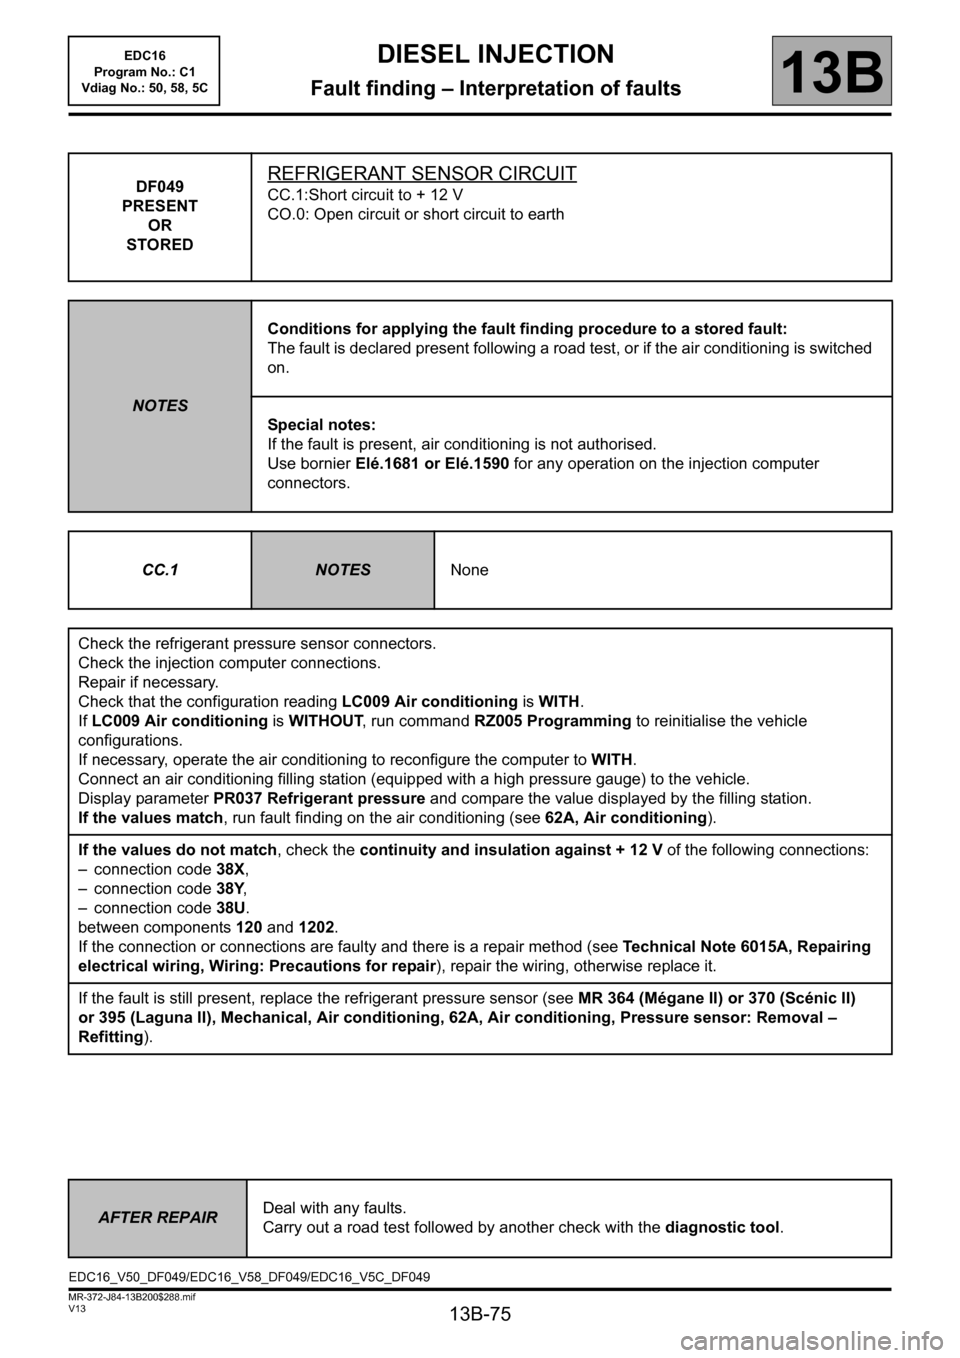 RENAULT SCENIC 2011 J95 / 3.G Engine And Peripherals EDC16 Workshop Manual 13B-75
MR-372-J84-13B200$288.mif
V13
13B
DIESEL INJECTION
Fault finding – Interpretation of faults
DF049
PRESENT
OR
STOREDREFRIGERANT SENSOR CIRCUIT
CC.1:Short circuit to + 12 V
CO.0: Open circuit o